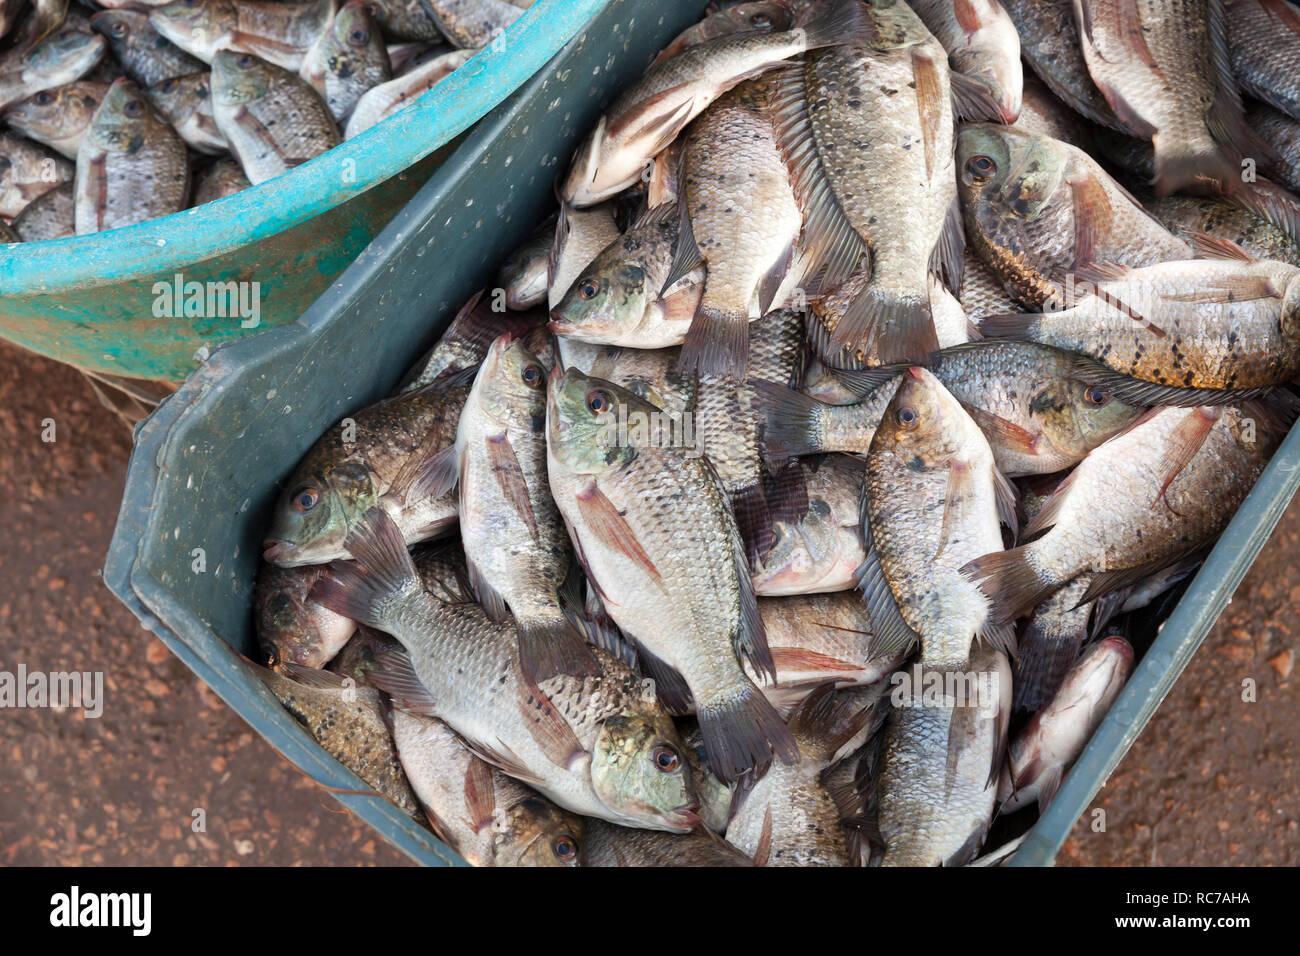 Fish catch. Sargo or white seabream fishes lay in green plastic boxes on a marketplace of Alexandria, Egypt Stock Photo